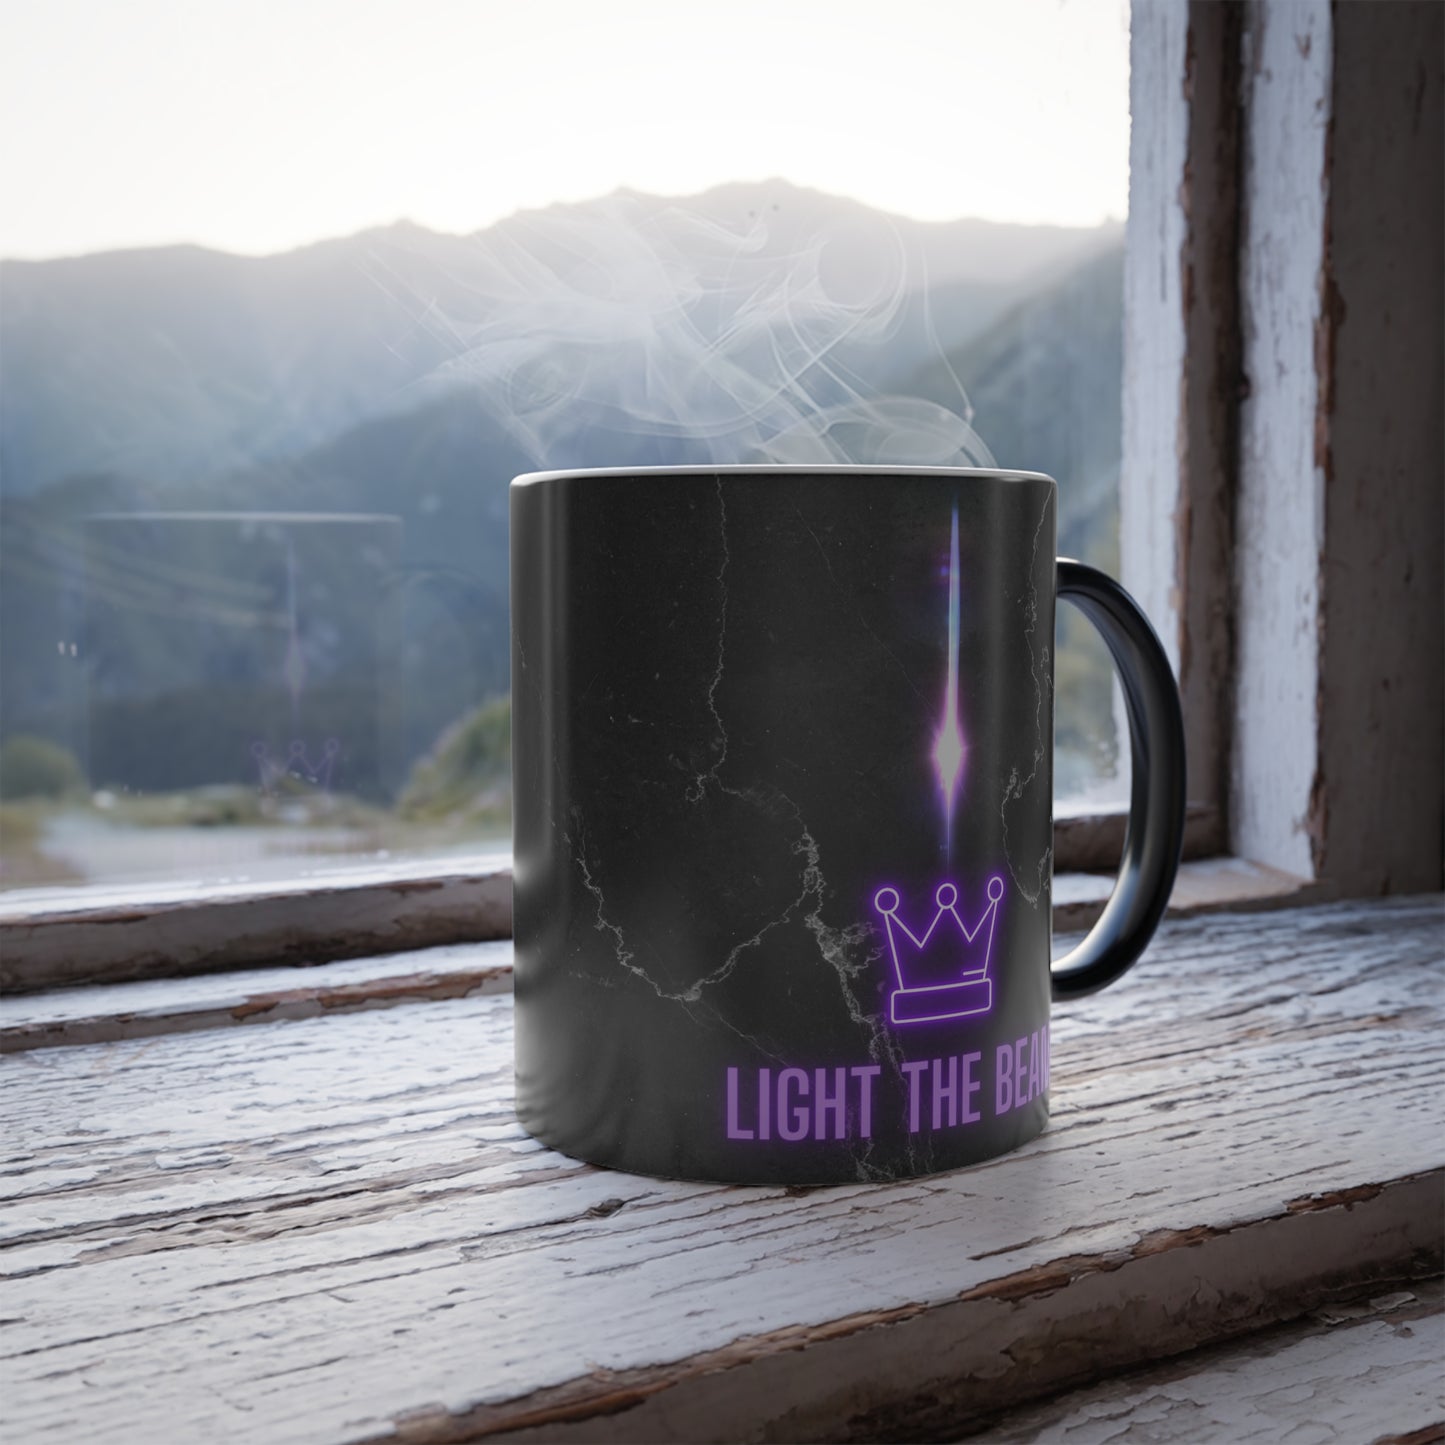 Light the Beam Kings Basketball Secret Reveal 11oz Mug.Light the Beam, BeamTown! Celebrate another W - WIN - for your Kings Basketball team and light the beam at home with this secret reveal mug. Mug is all black when cold but when hot liquid is poured in, the famous Sac Town Beam is revealed. Perfect way to show off another W at the office with your morning cup of coffee. Kids LOVE to light the beam themselves at home with their hot cocoa. 